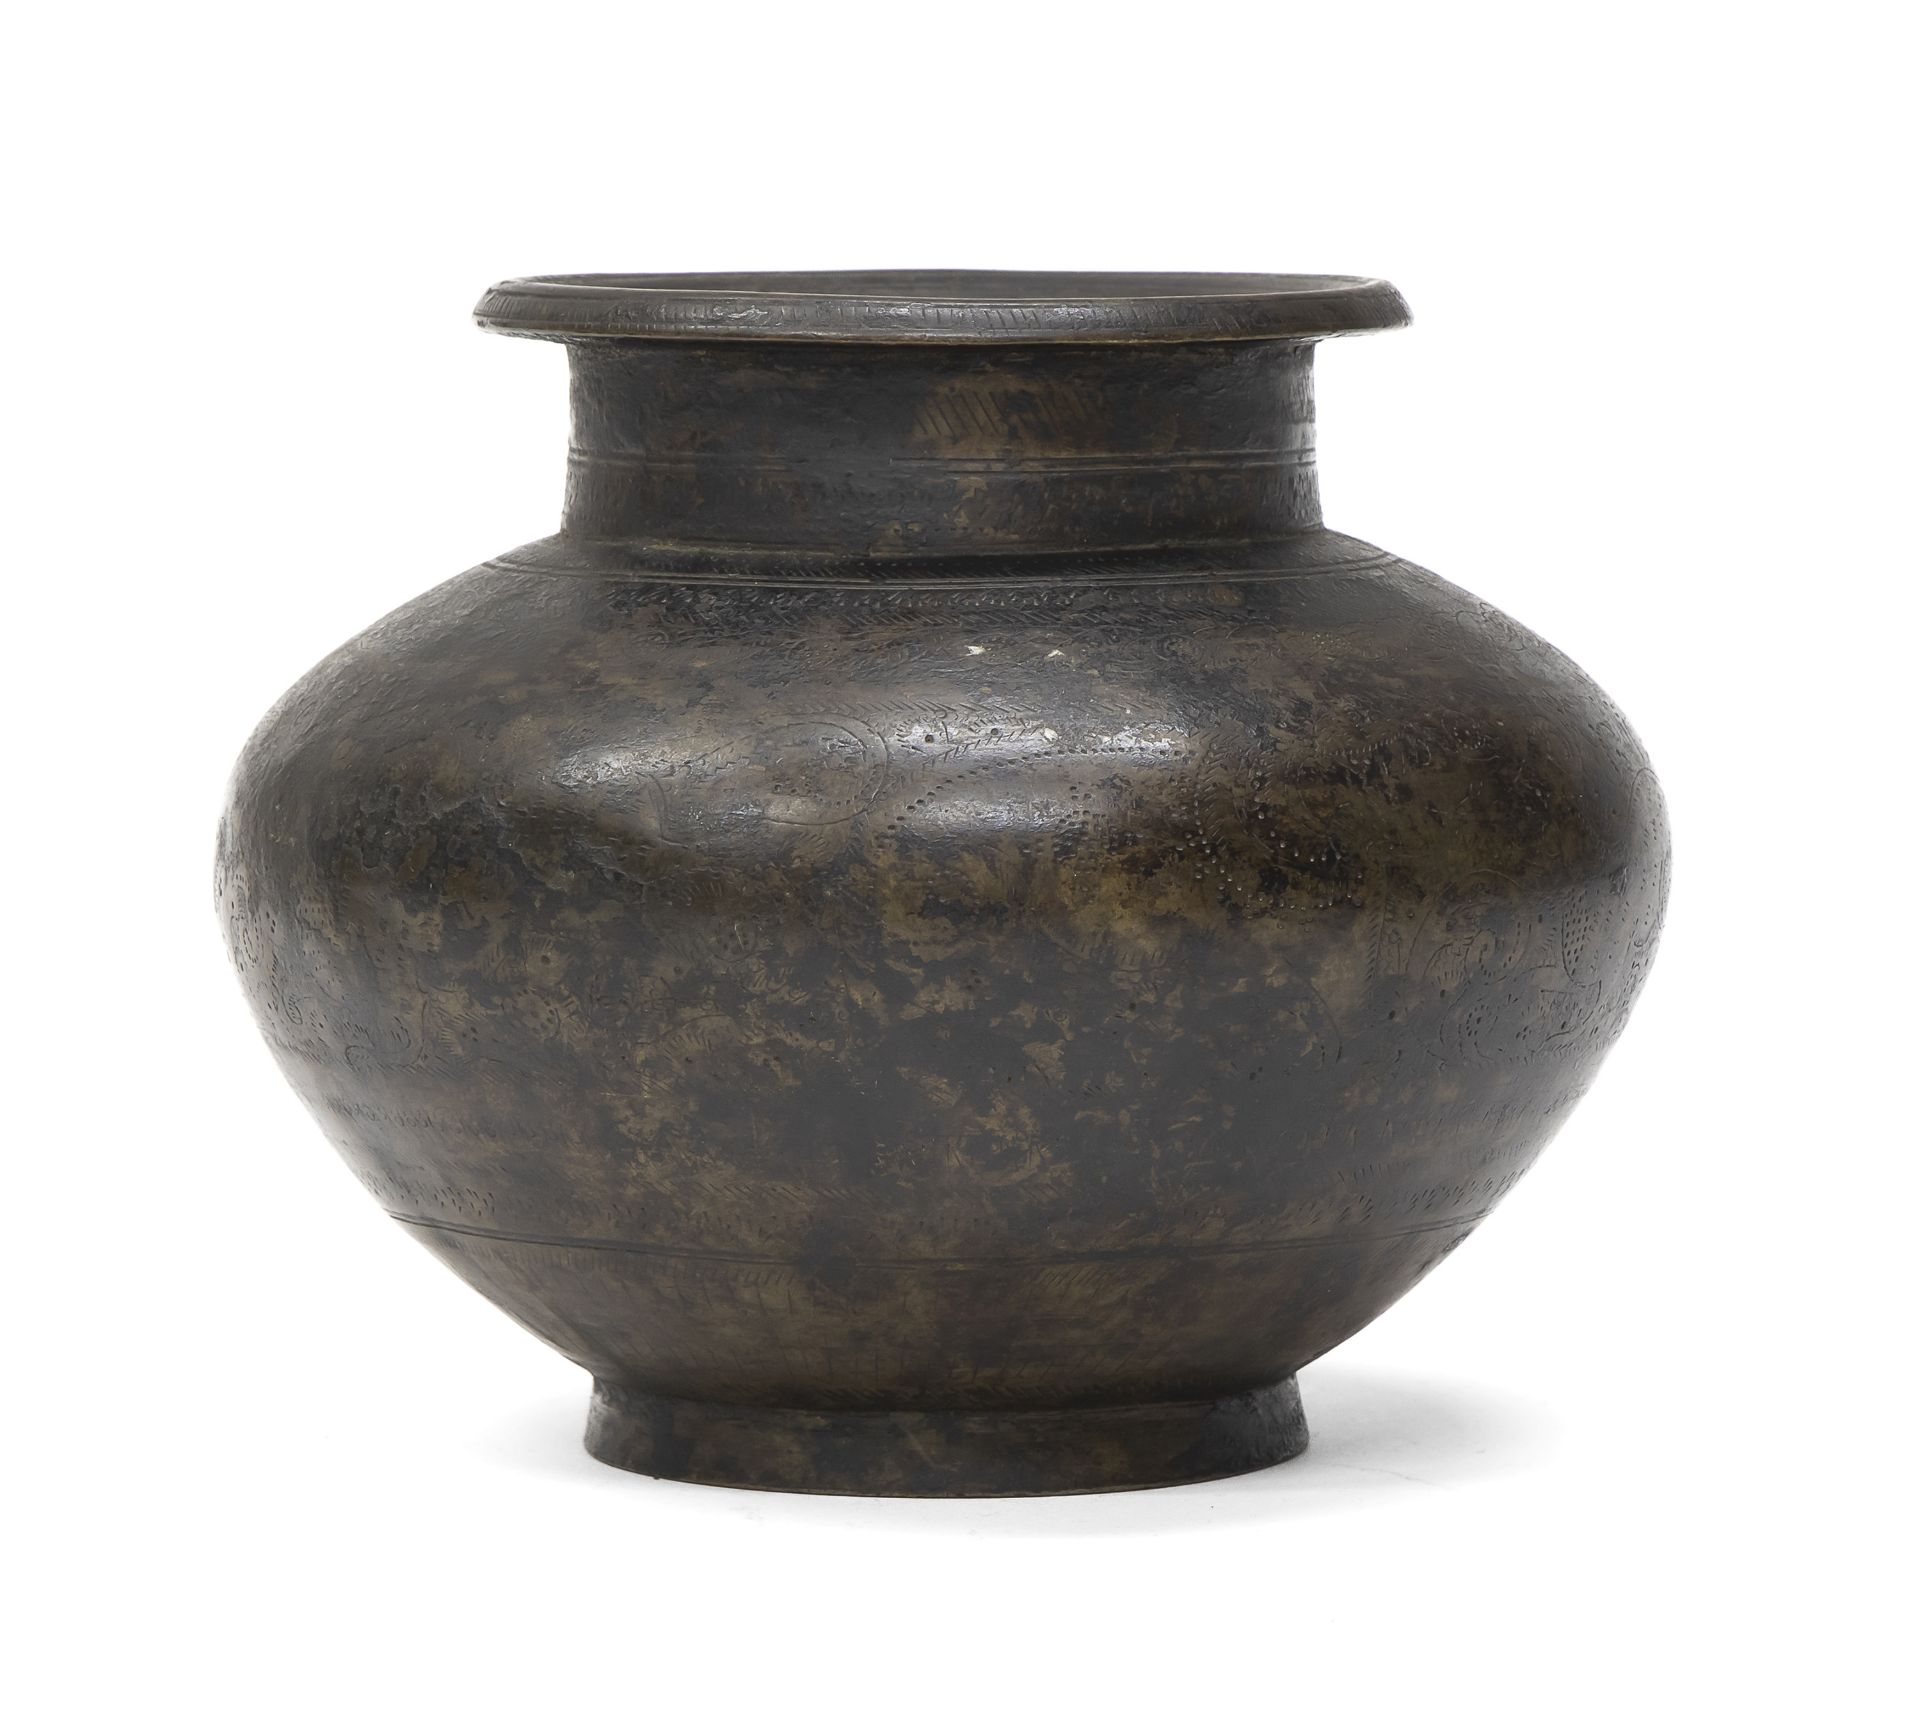 A SMALL BURNISHED BRONZE JAR INDIA 19TH CENTURY.